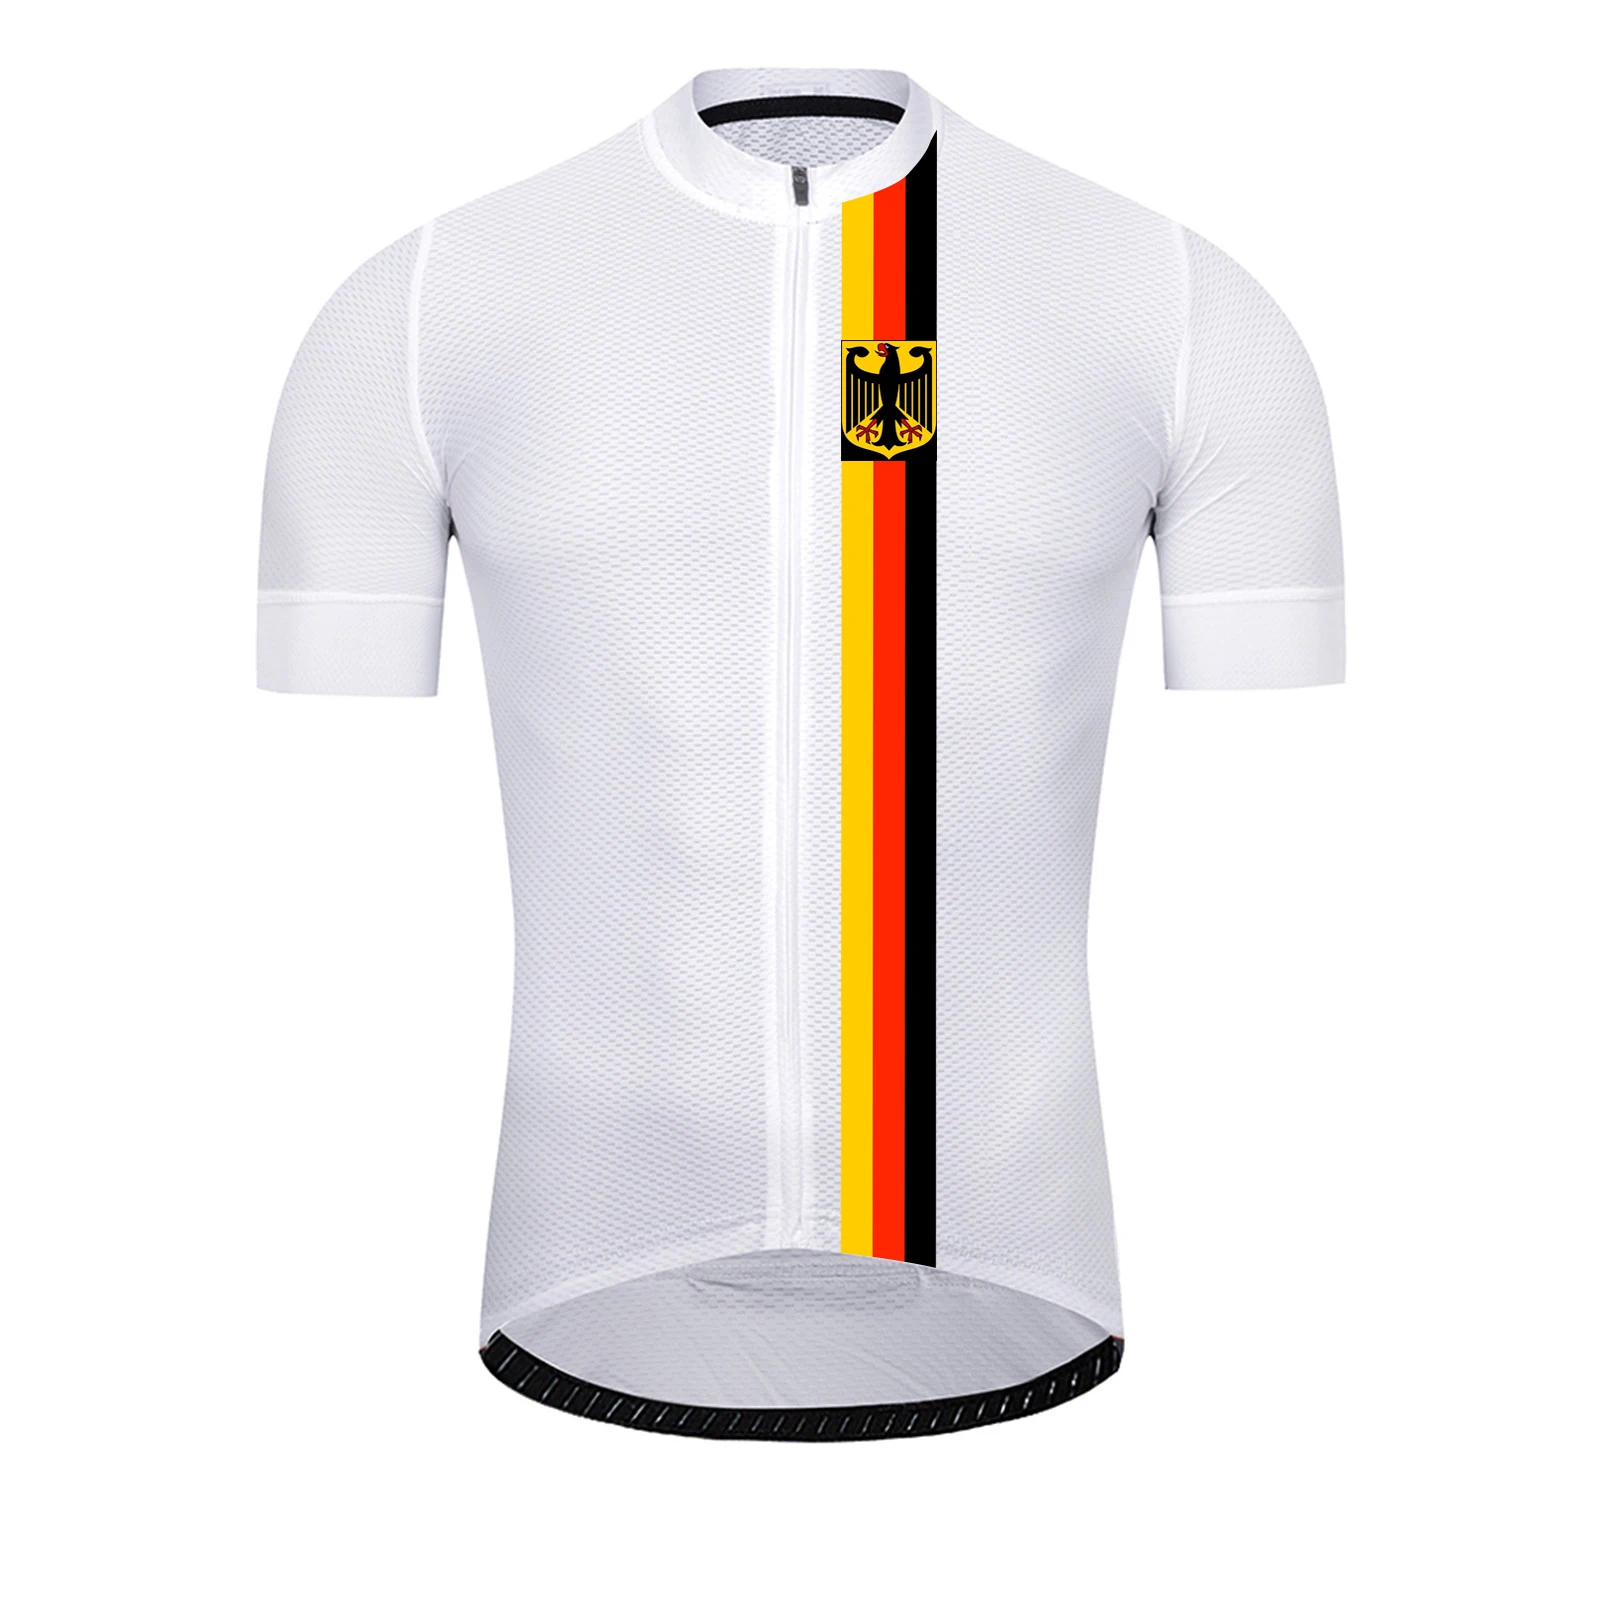 Germany Cycling Jersey Short Sleeve Summer Pro Road Shirt Bicycle Wear Cycle Downhill Racing MTB Clothes Mountain Ride Clothing